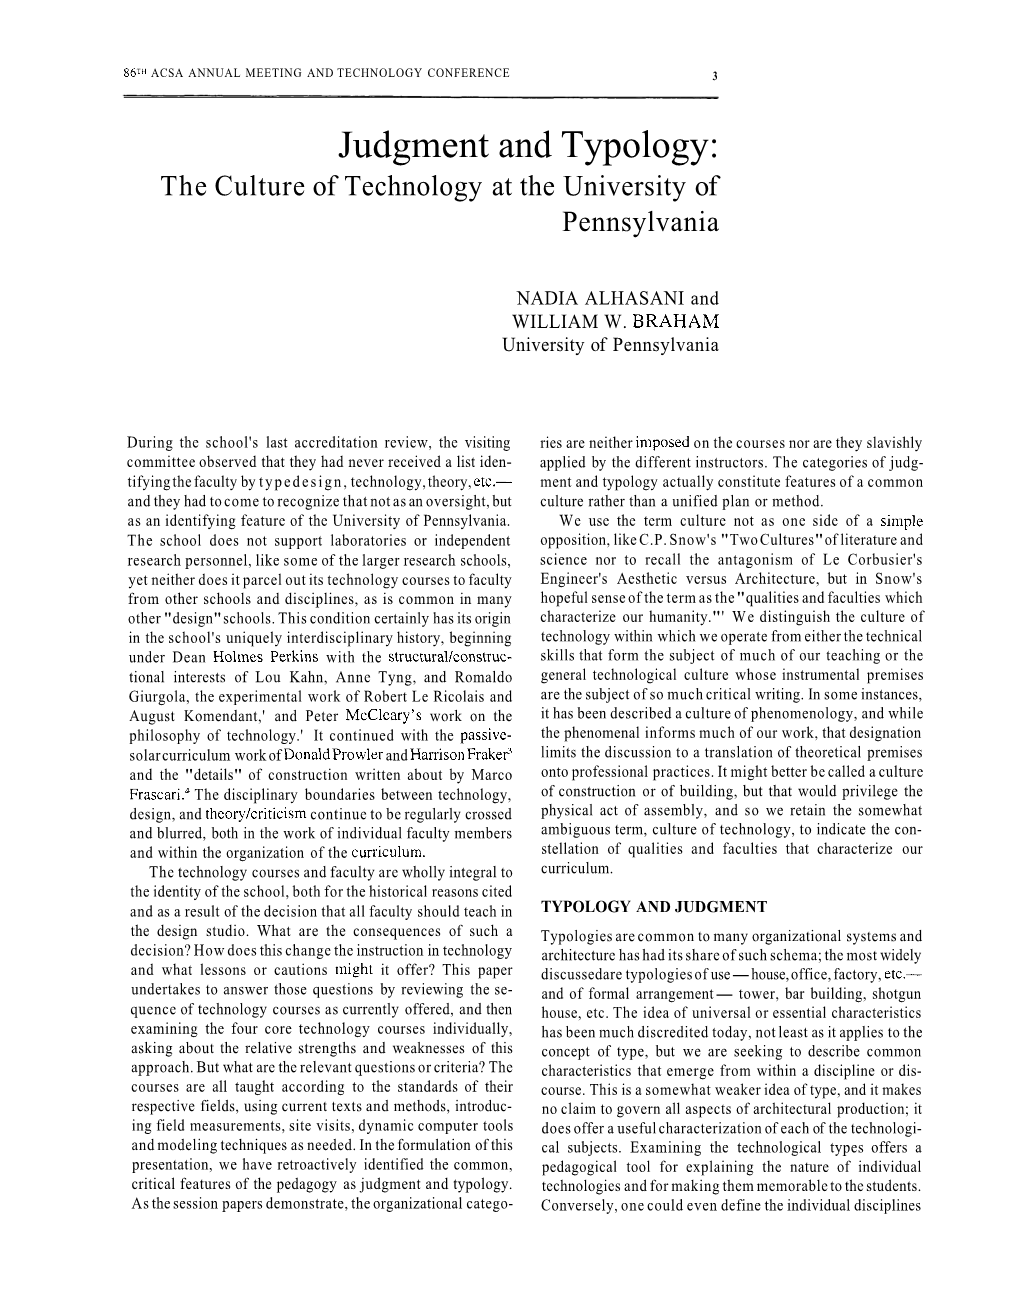 Judgment and Typology: the Culture of Technology at the University of Pennsylvania